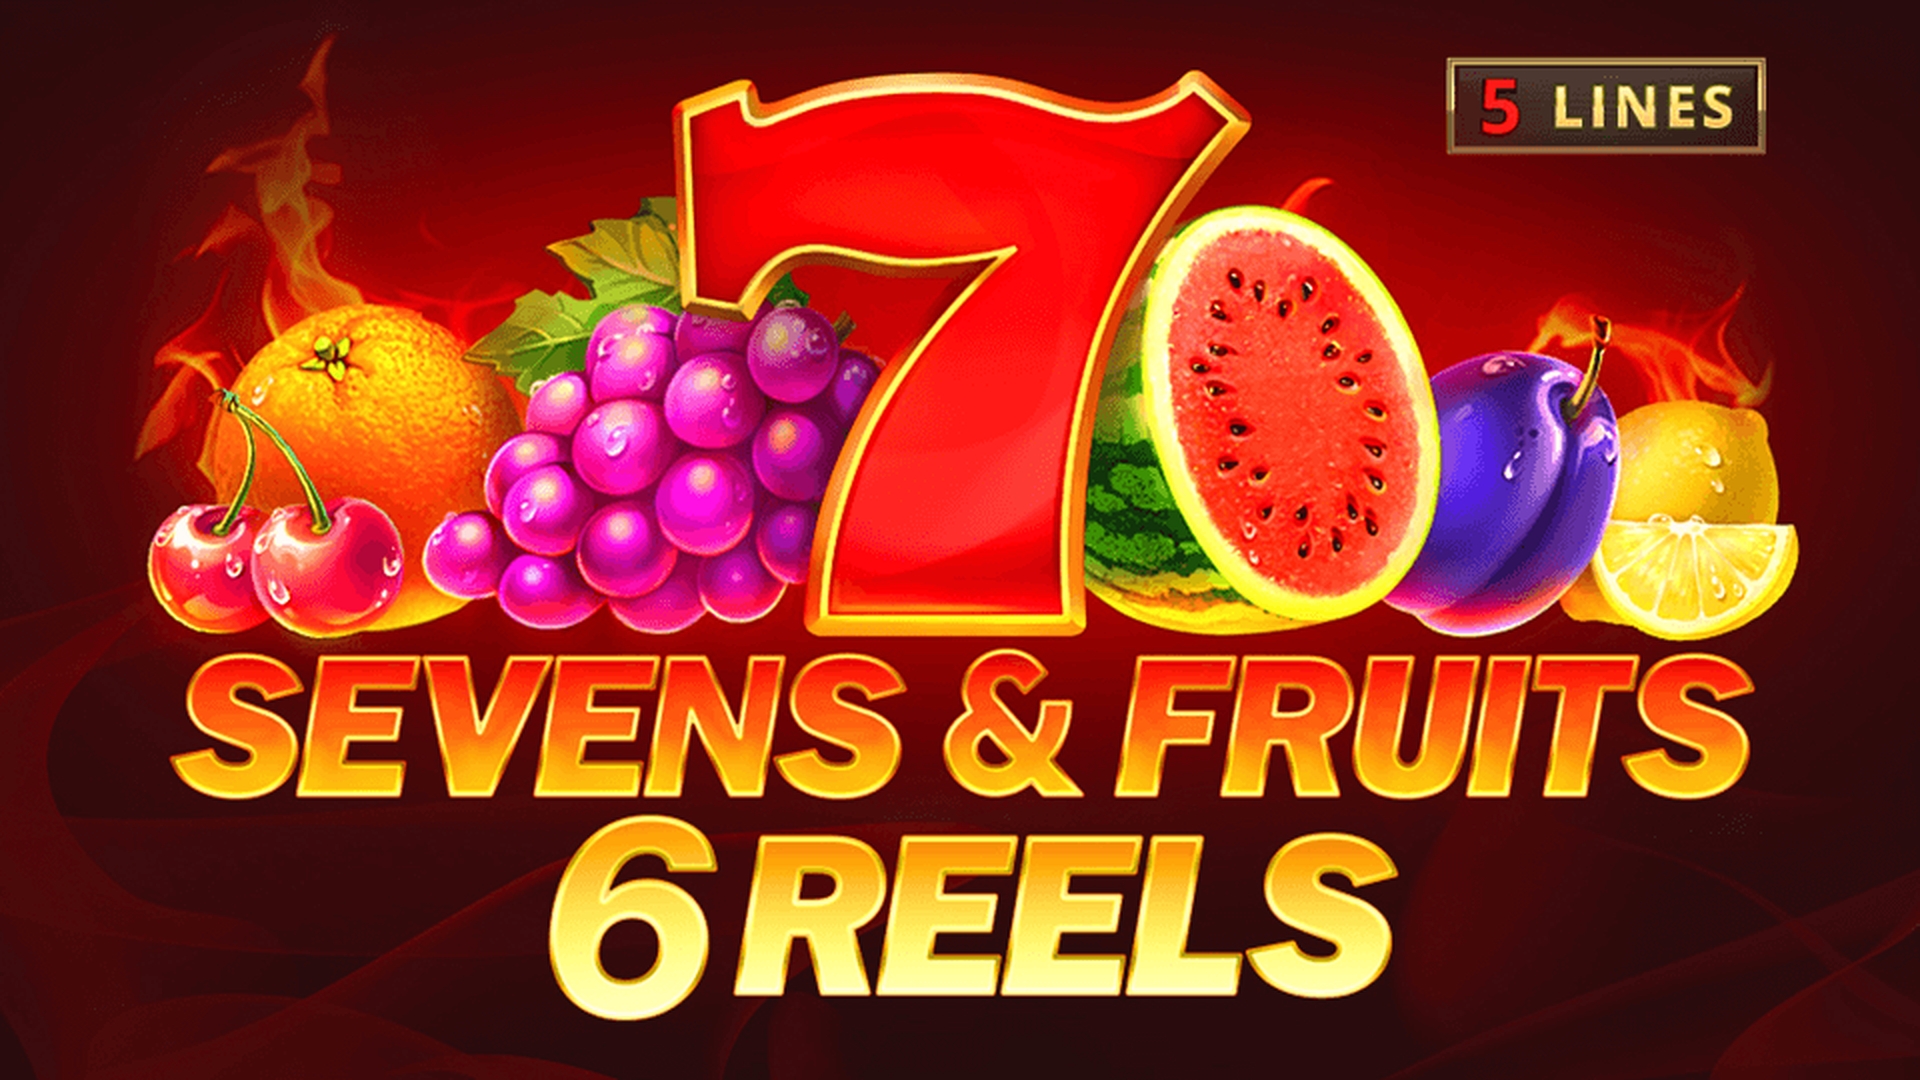 The Sevens and Fruits: 6 Reels Online Slot Demo Game by Playson